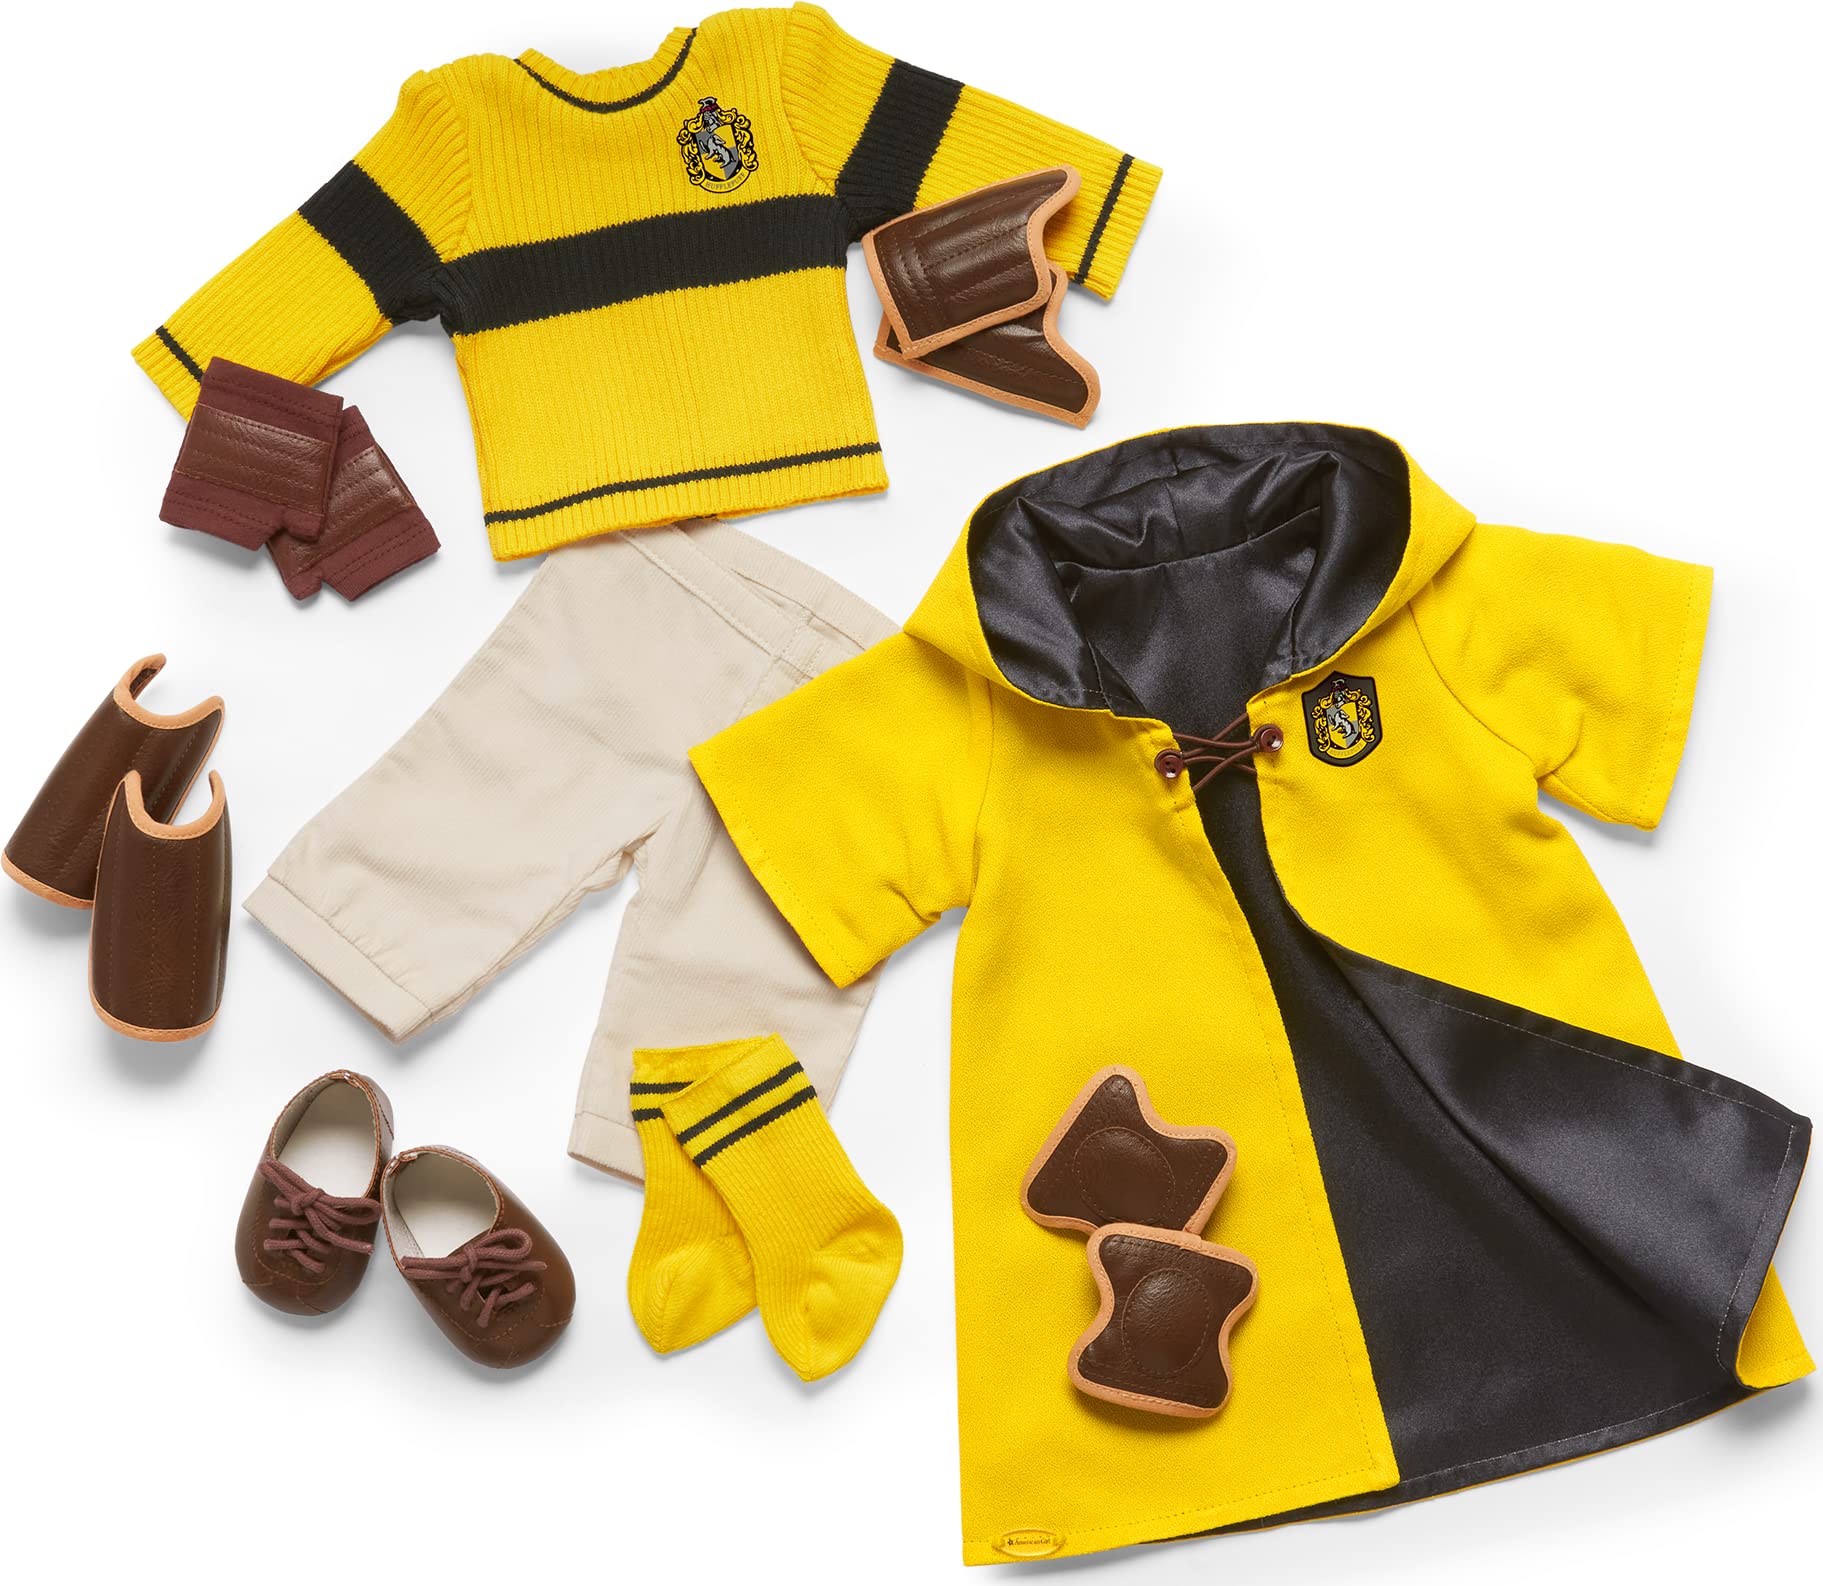 American Girl Harry Potter 18-inch Doll Hufflepuff Quidditch Uniform Outfit with Robe Featuring House Crest, For Ages 6+